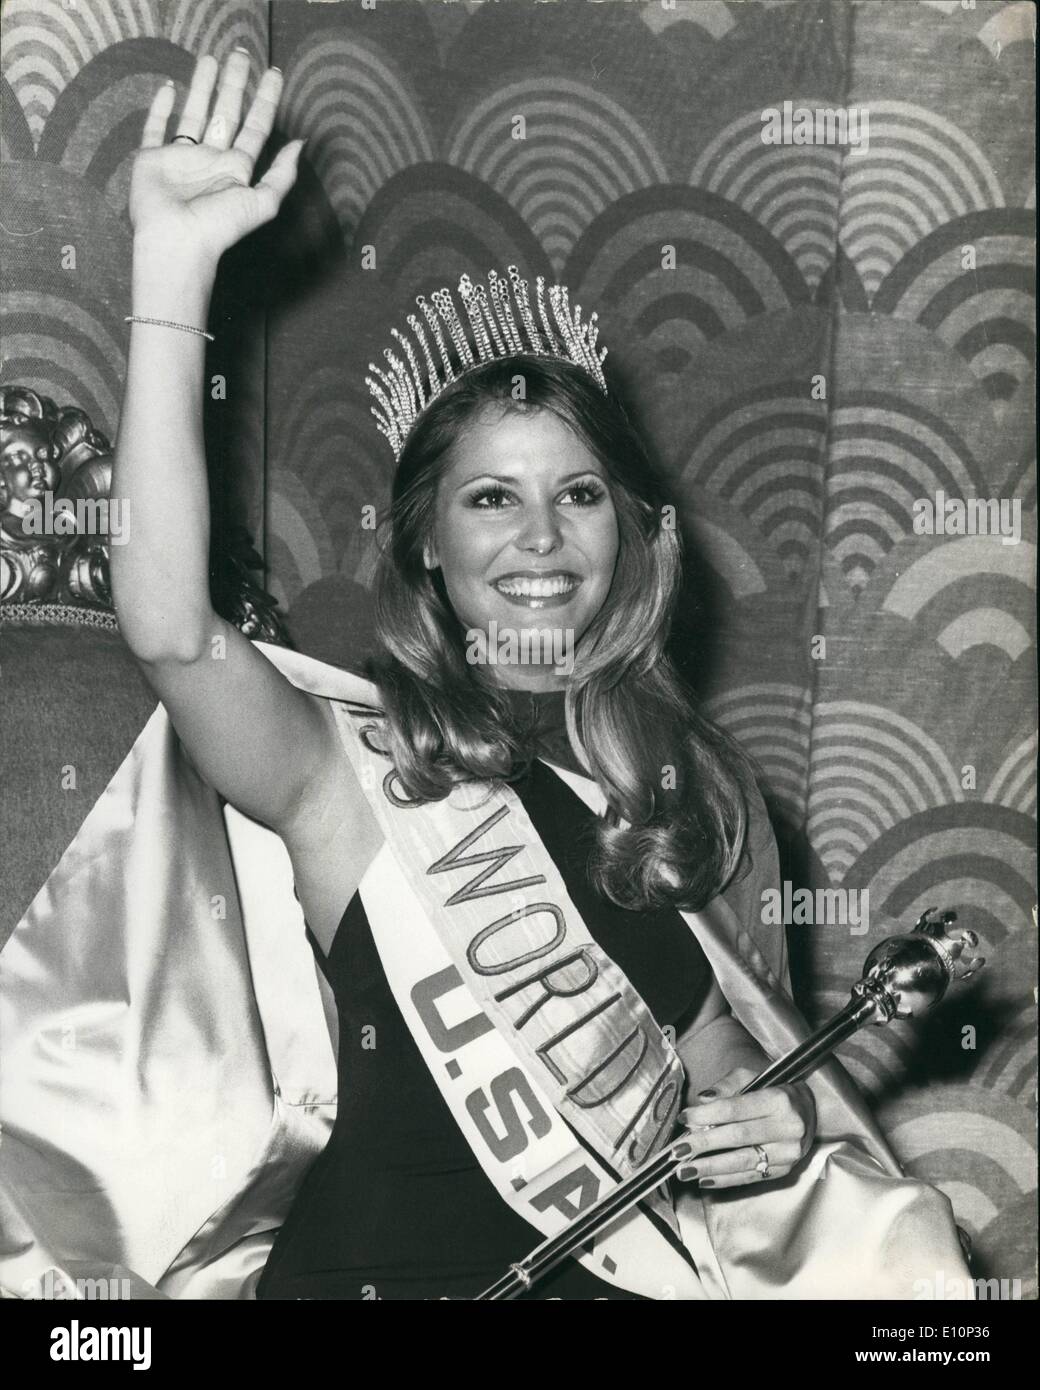 11, 1973 - Miss USA is Miss World 1973: 19 year old Marjorie Wallace (Miss...